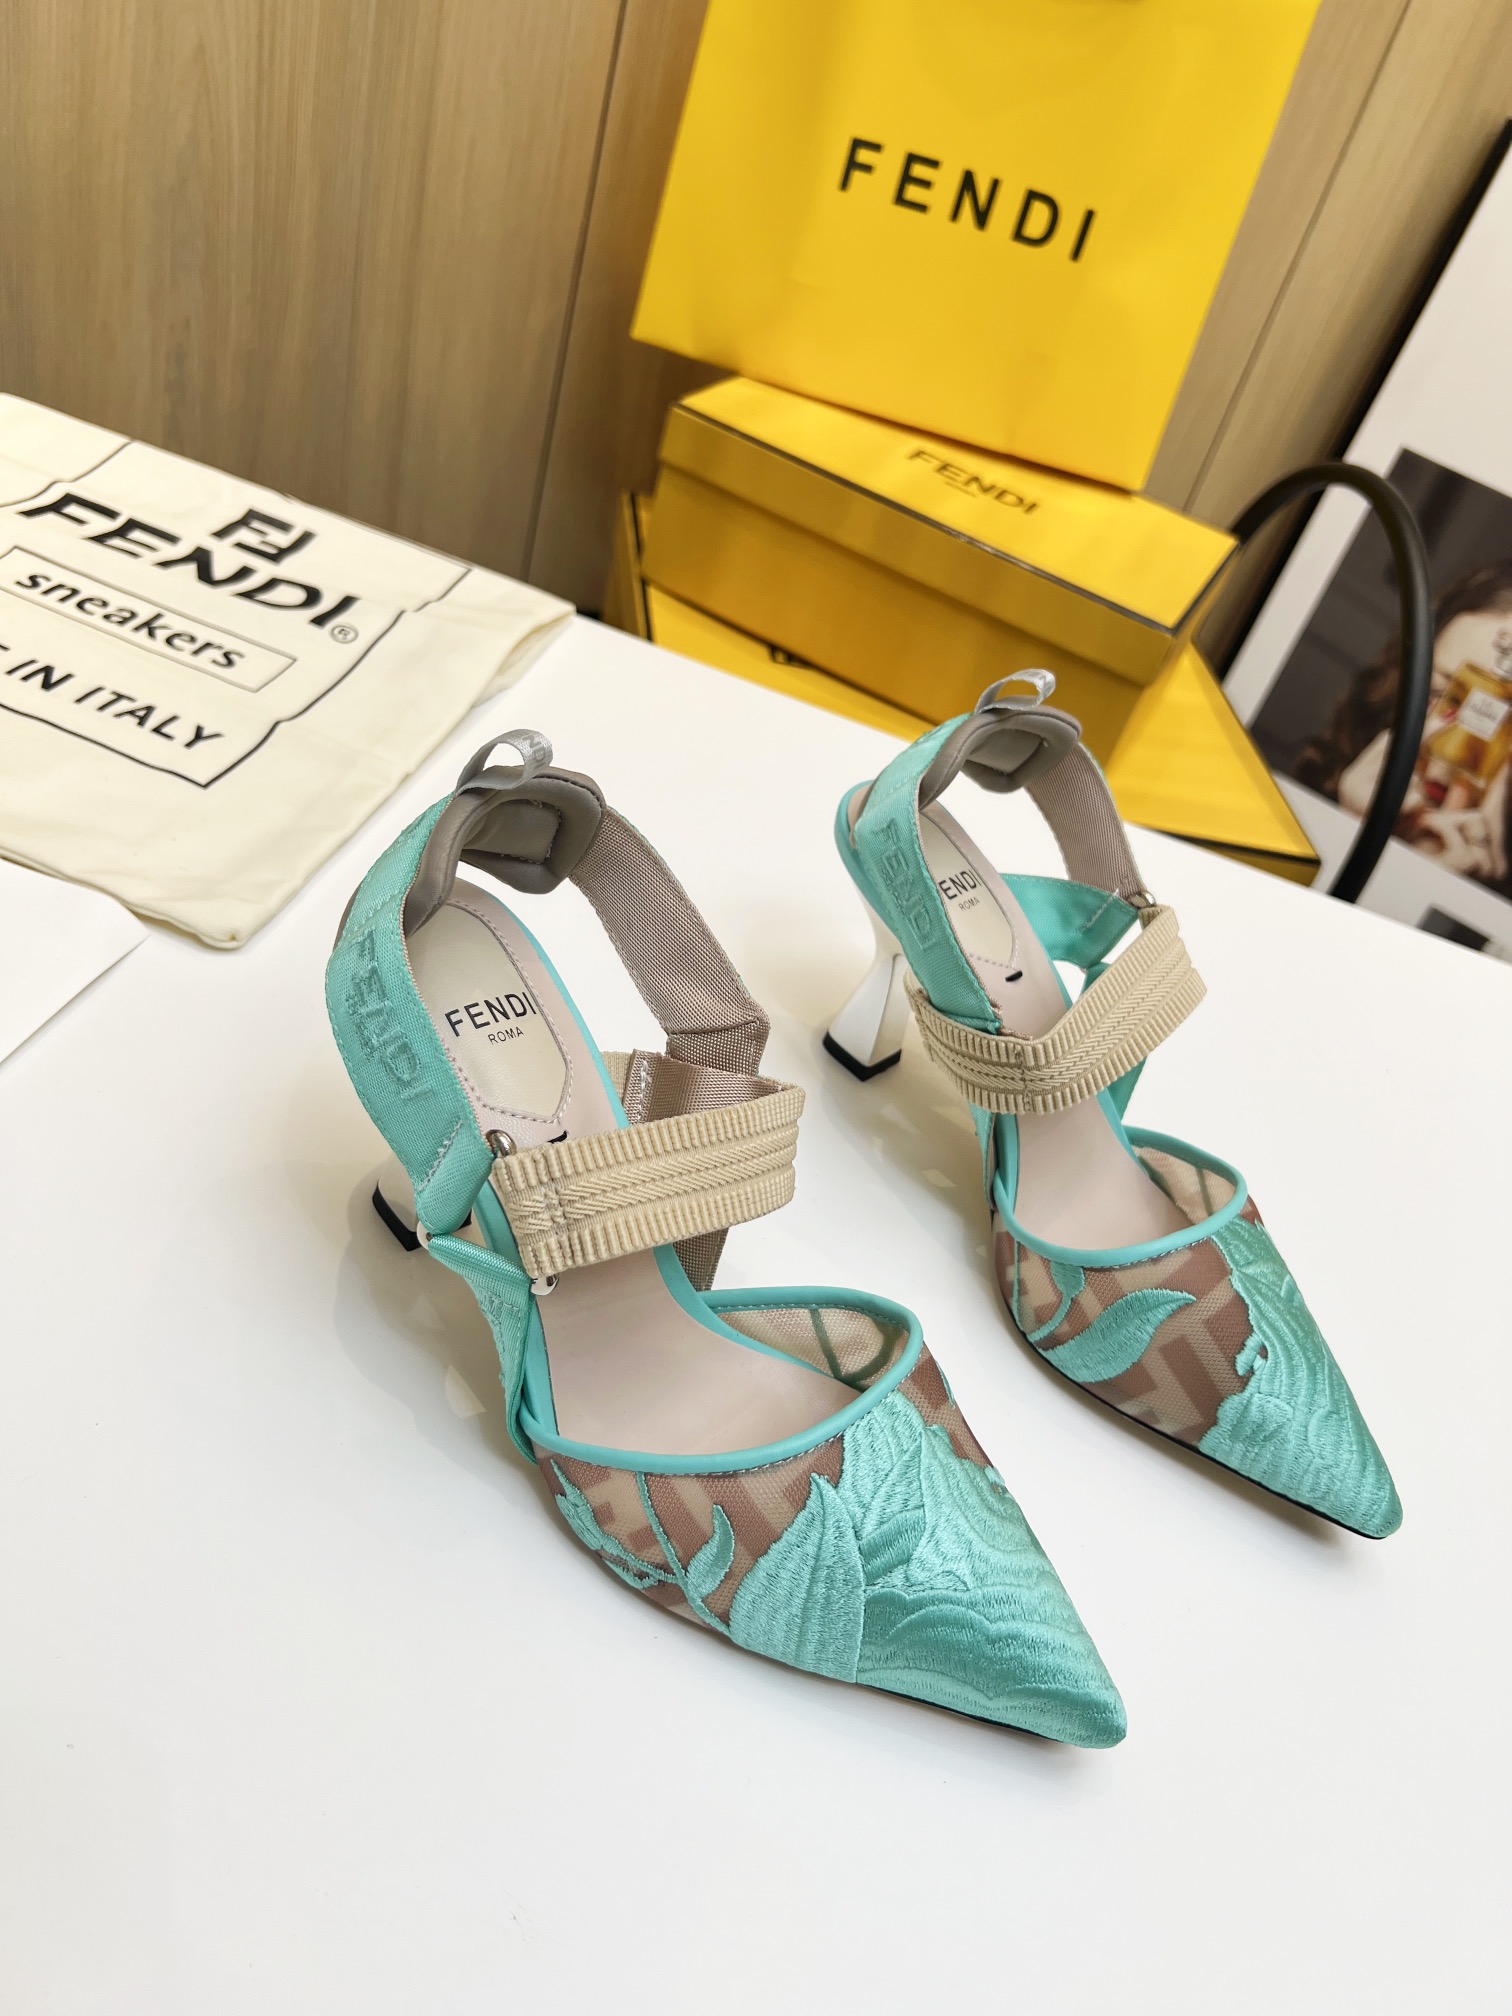 Shop Now
 Fendi Shoes High Heel Pumps Embroidery Rubber Spring Collection